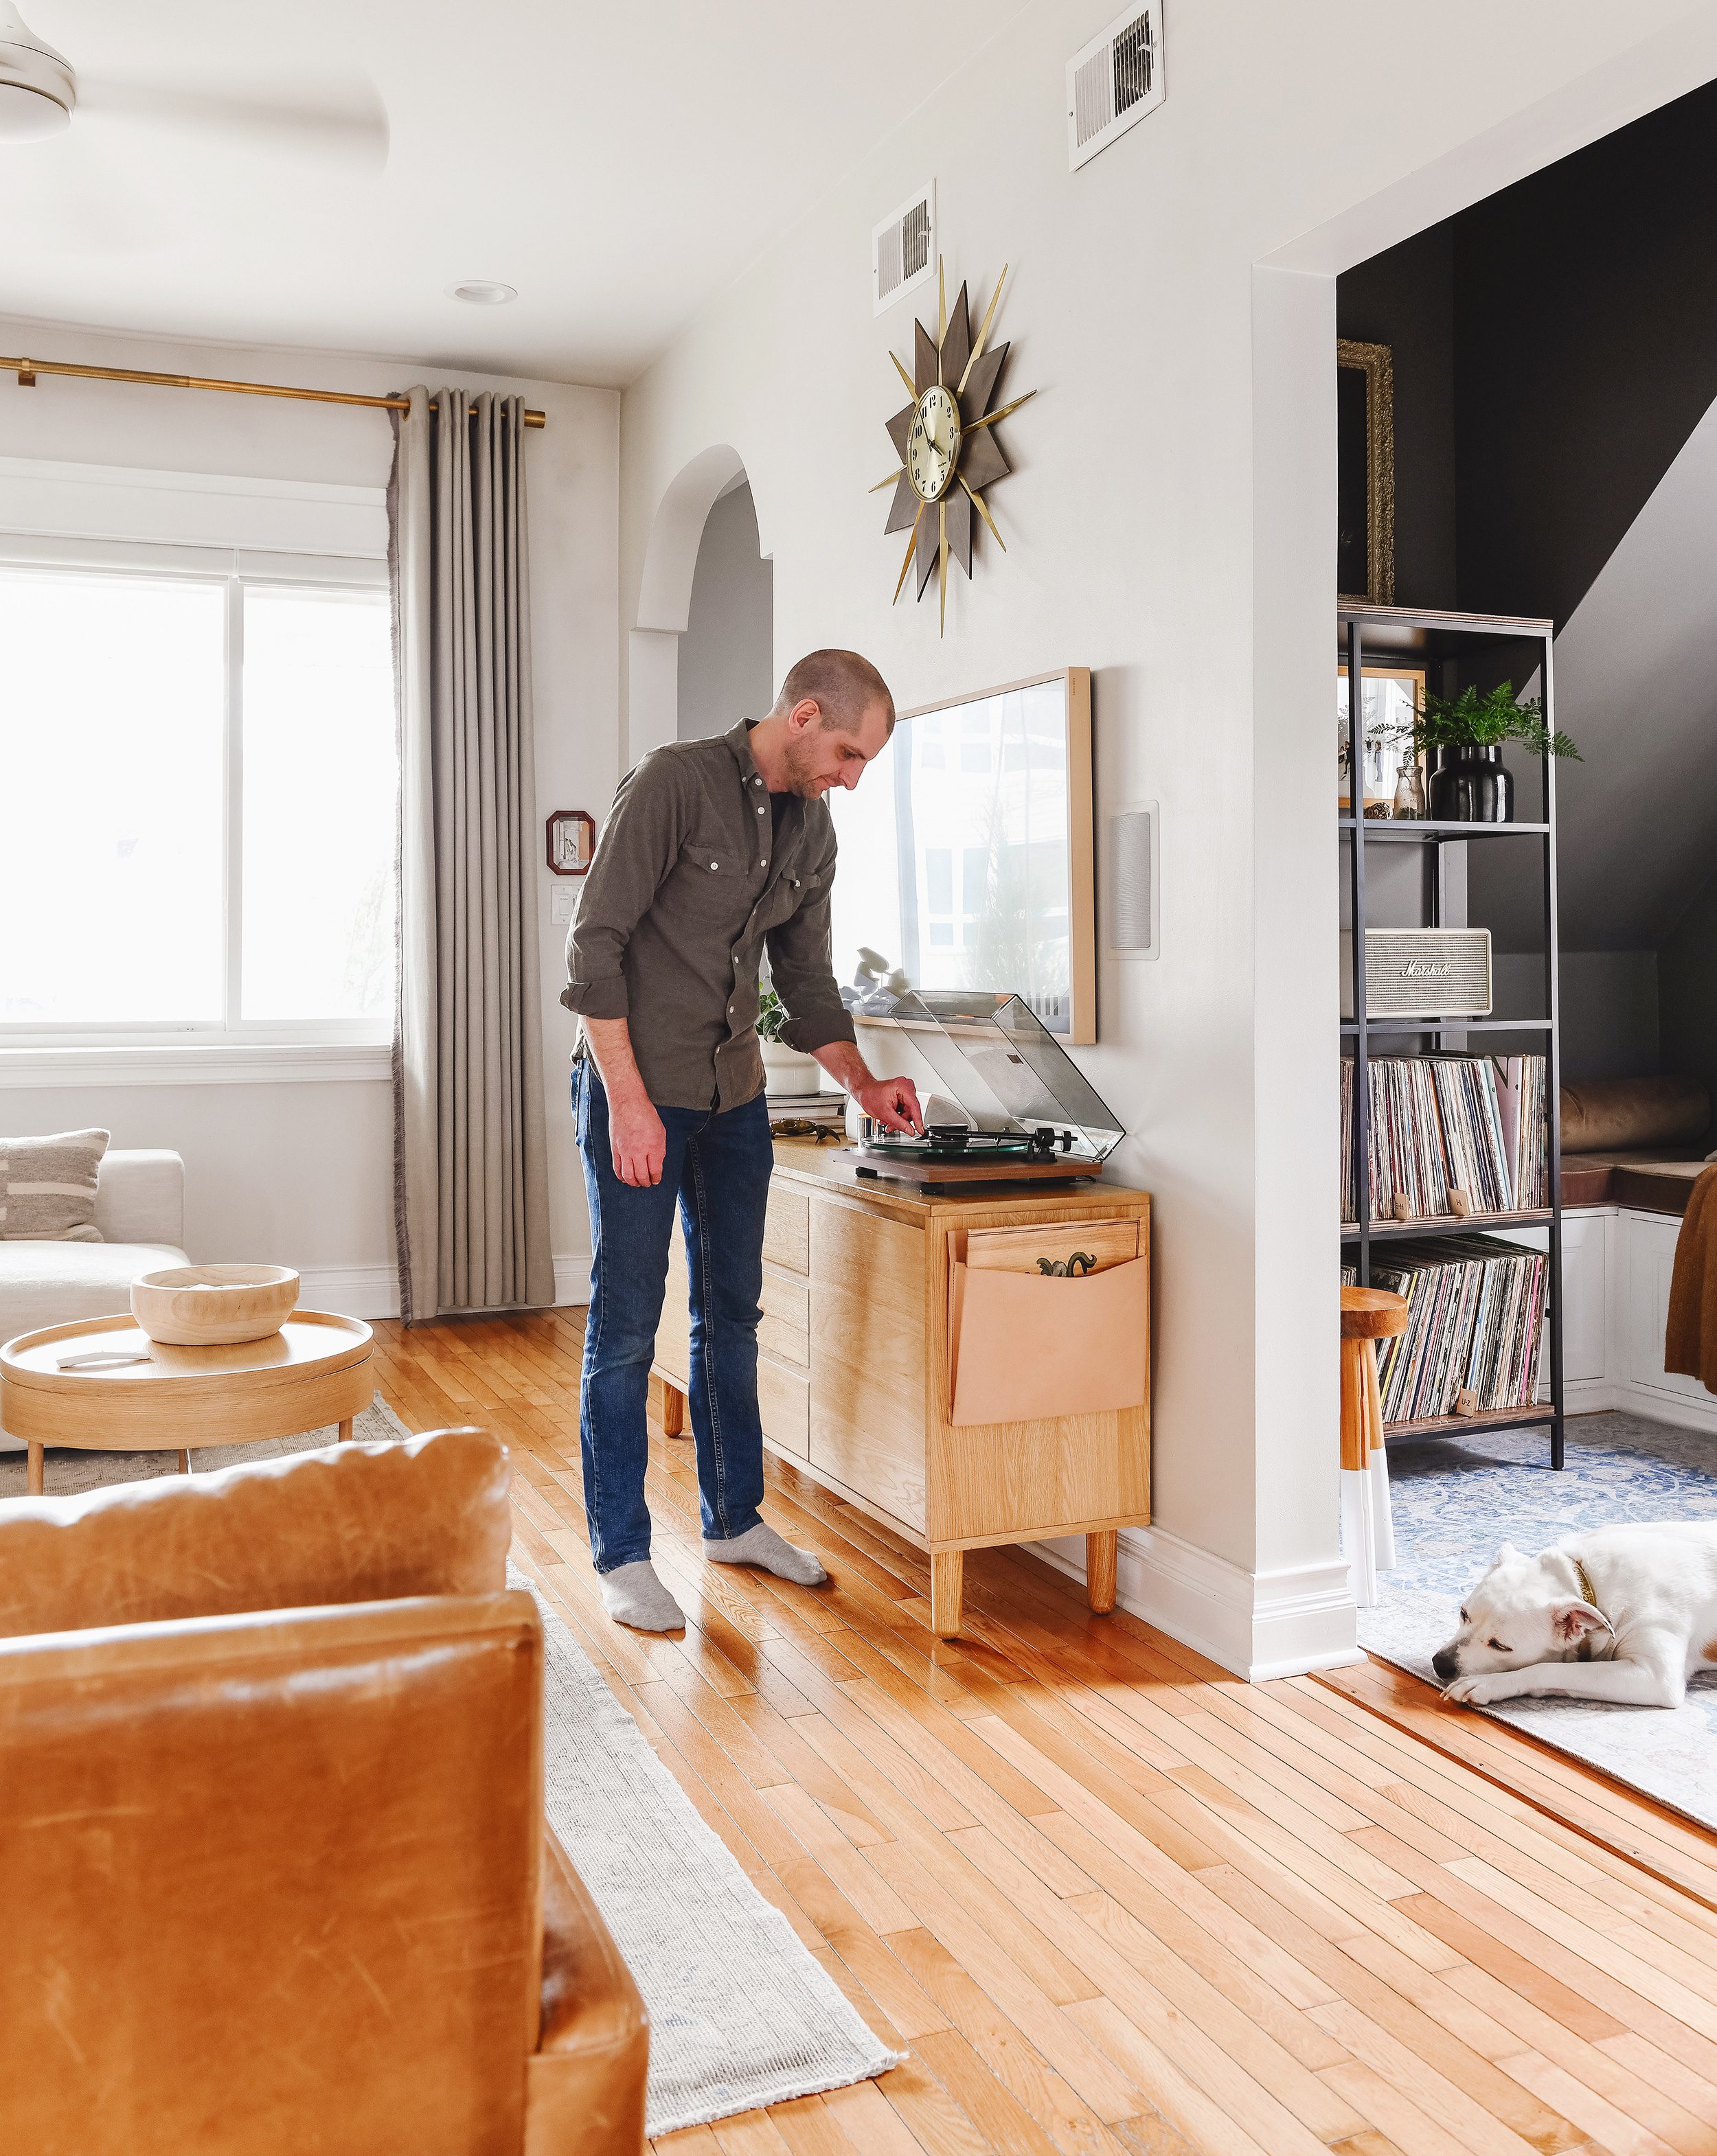 Scott cues up a record on the turntable in the living room of our Chicago home // via Yellow Brick Home